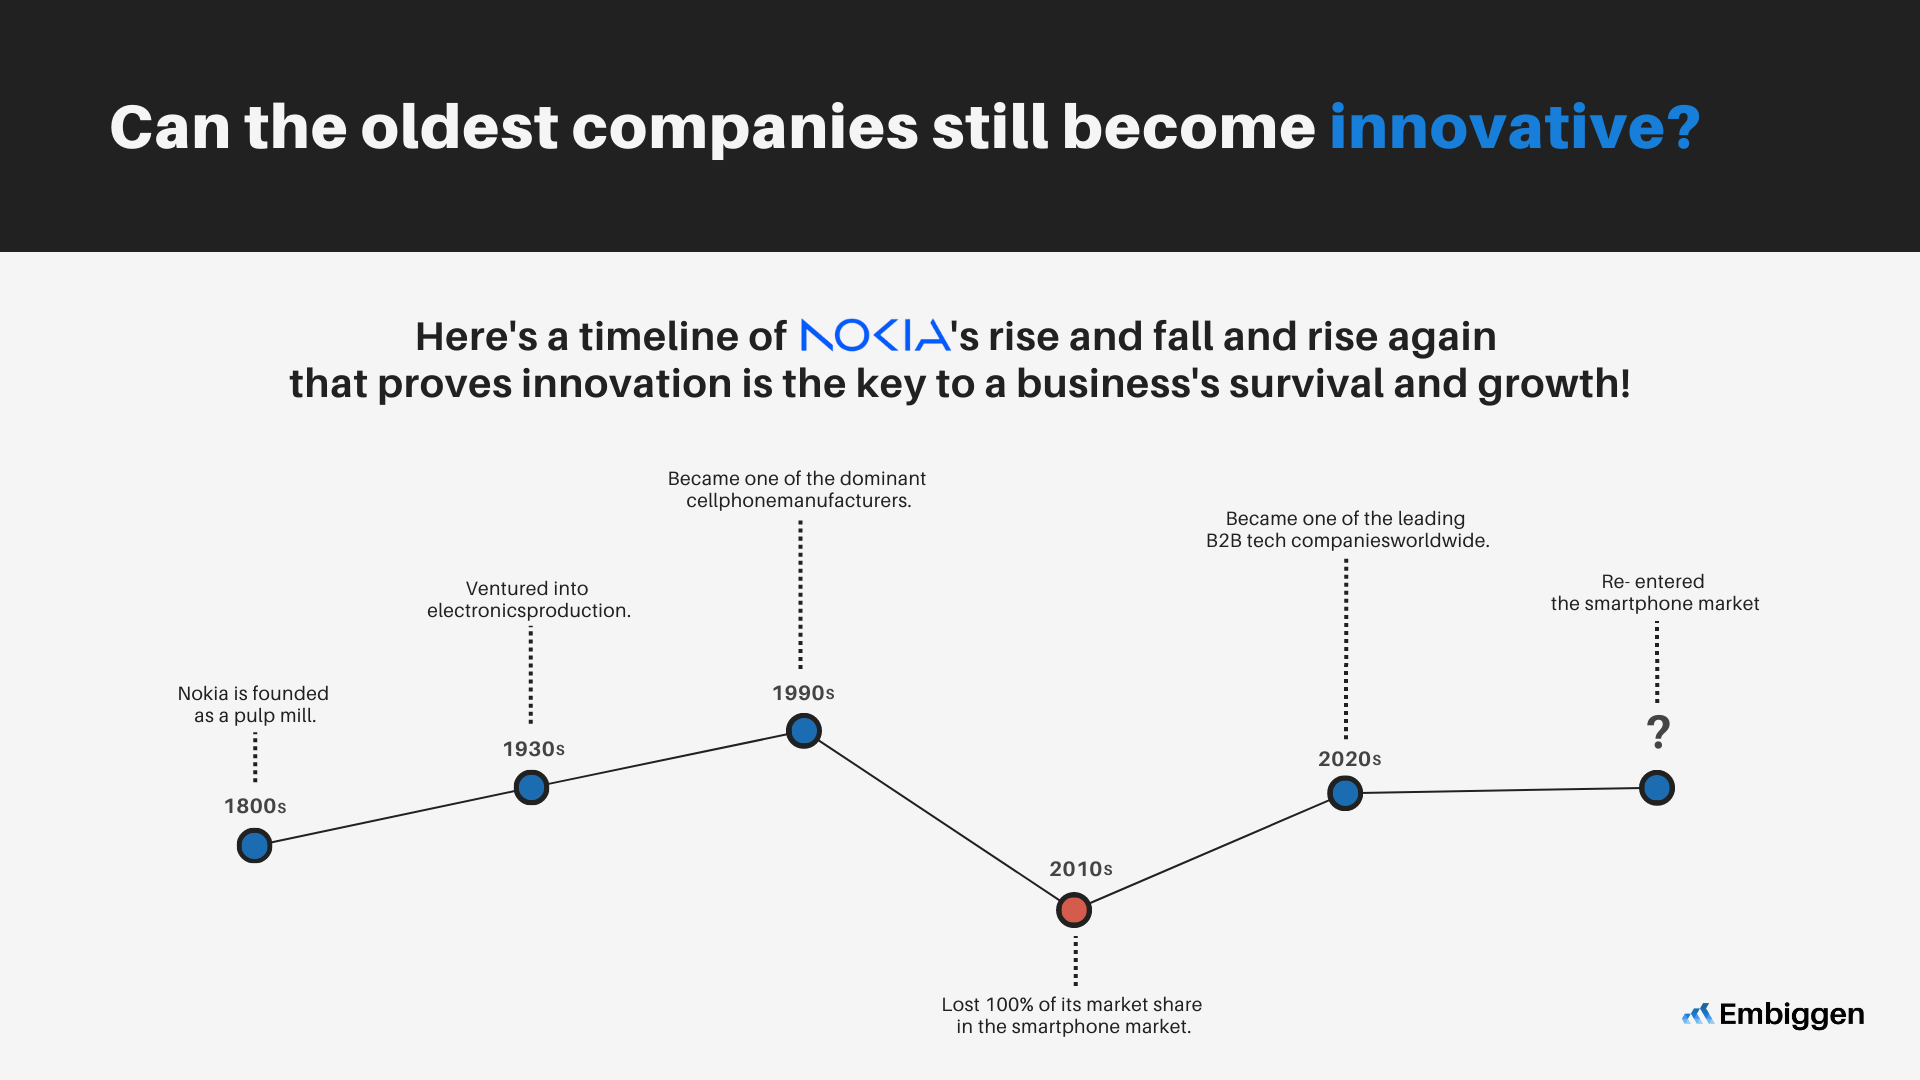 Timeline of major events in Nokia's history.